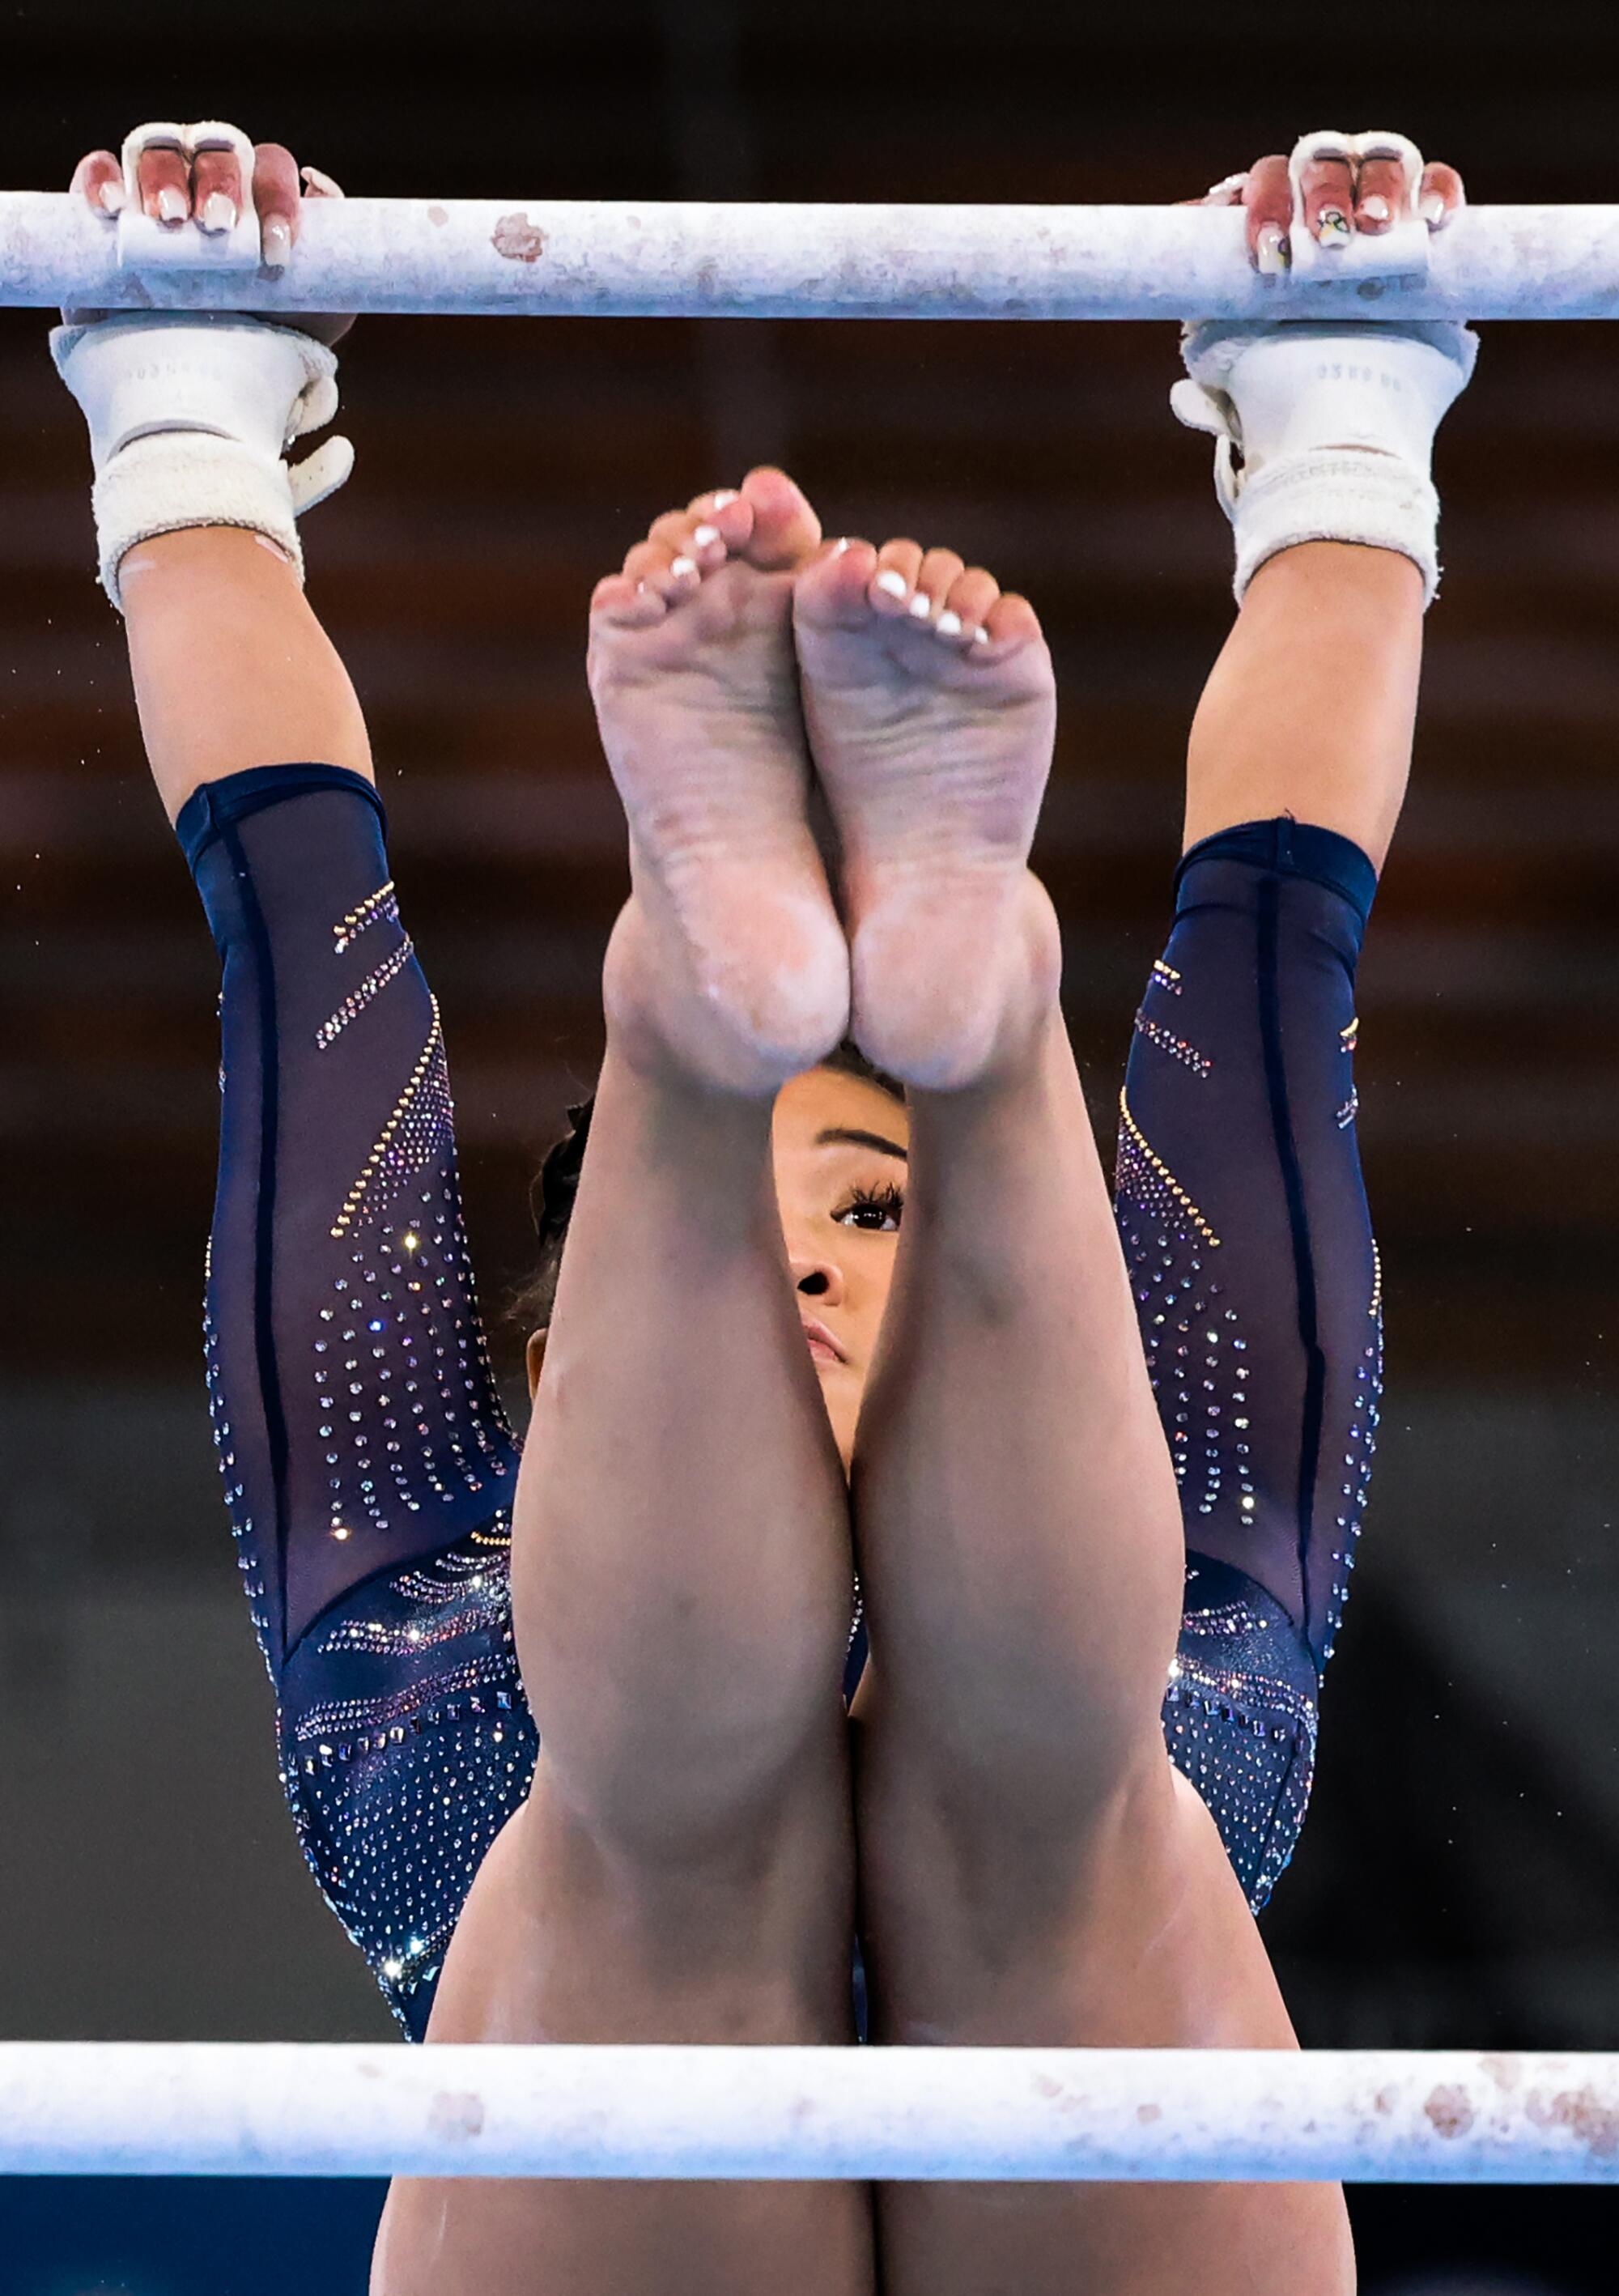 USA gymnast Sunisa Lee earned a bronze medal in the uneven bars.